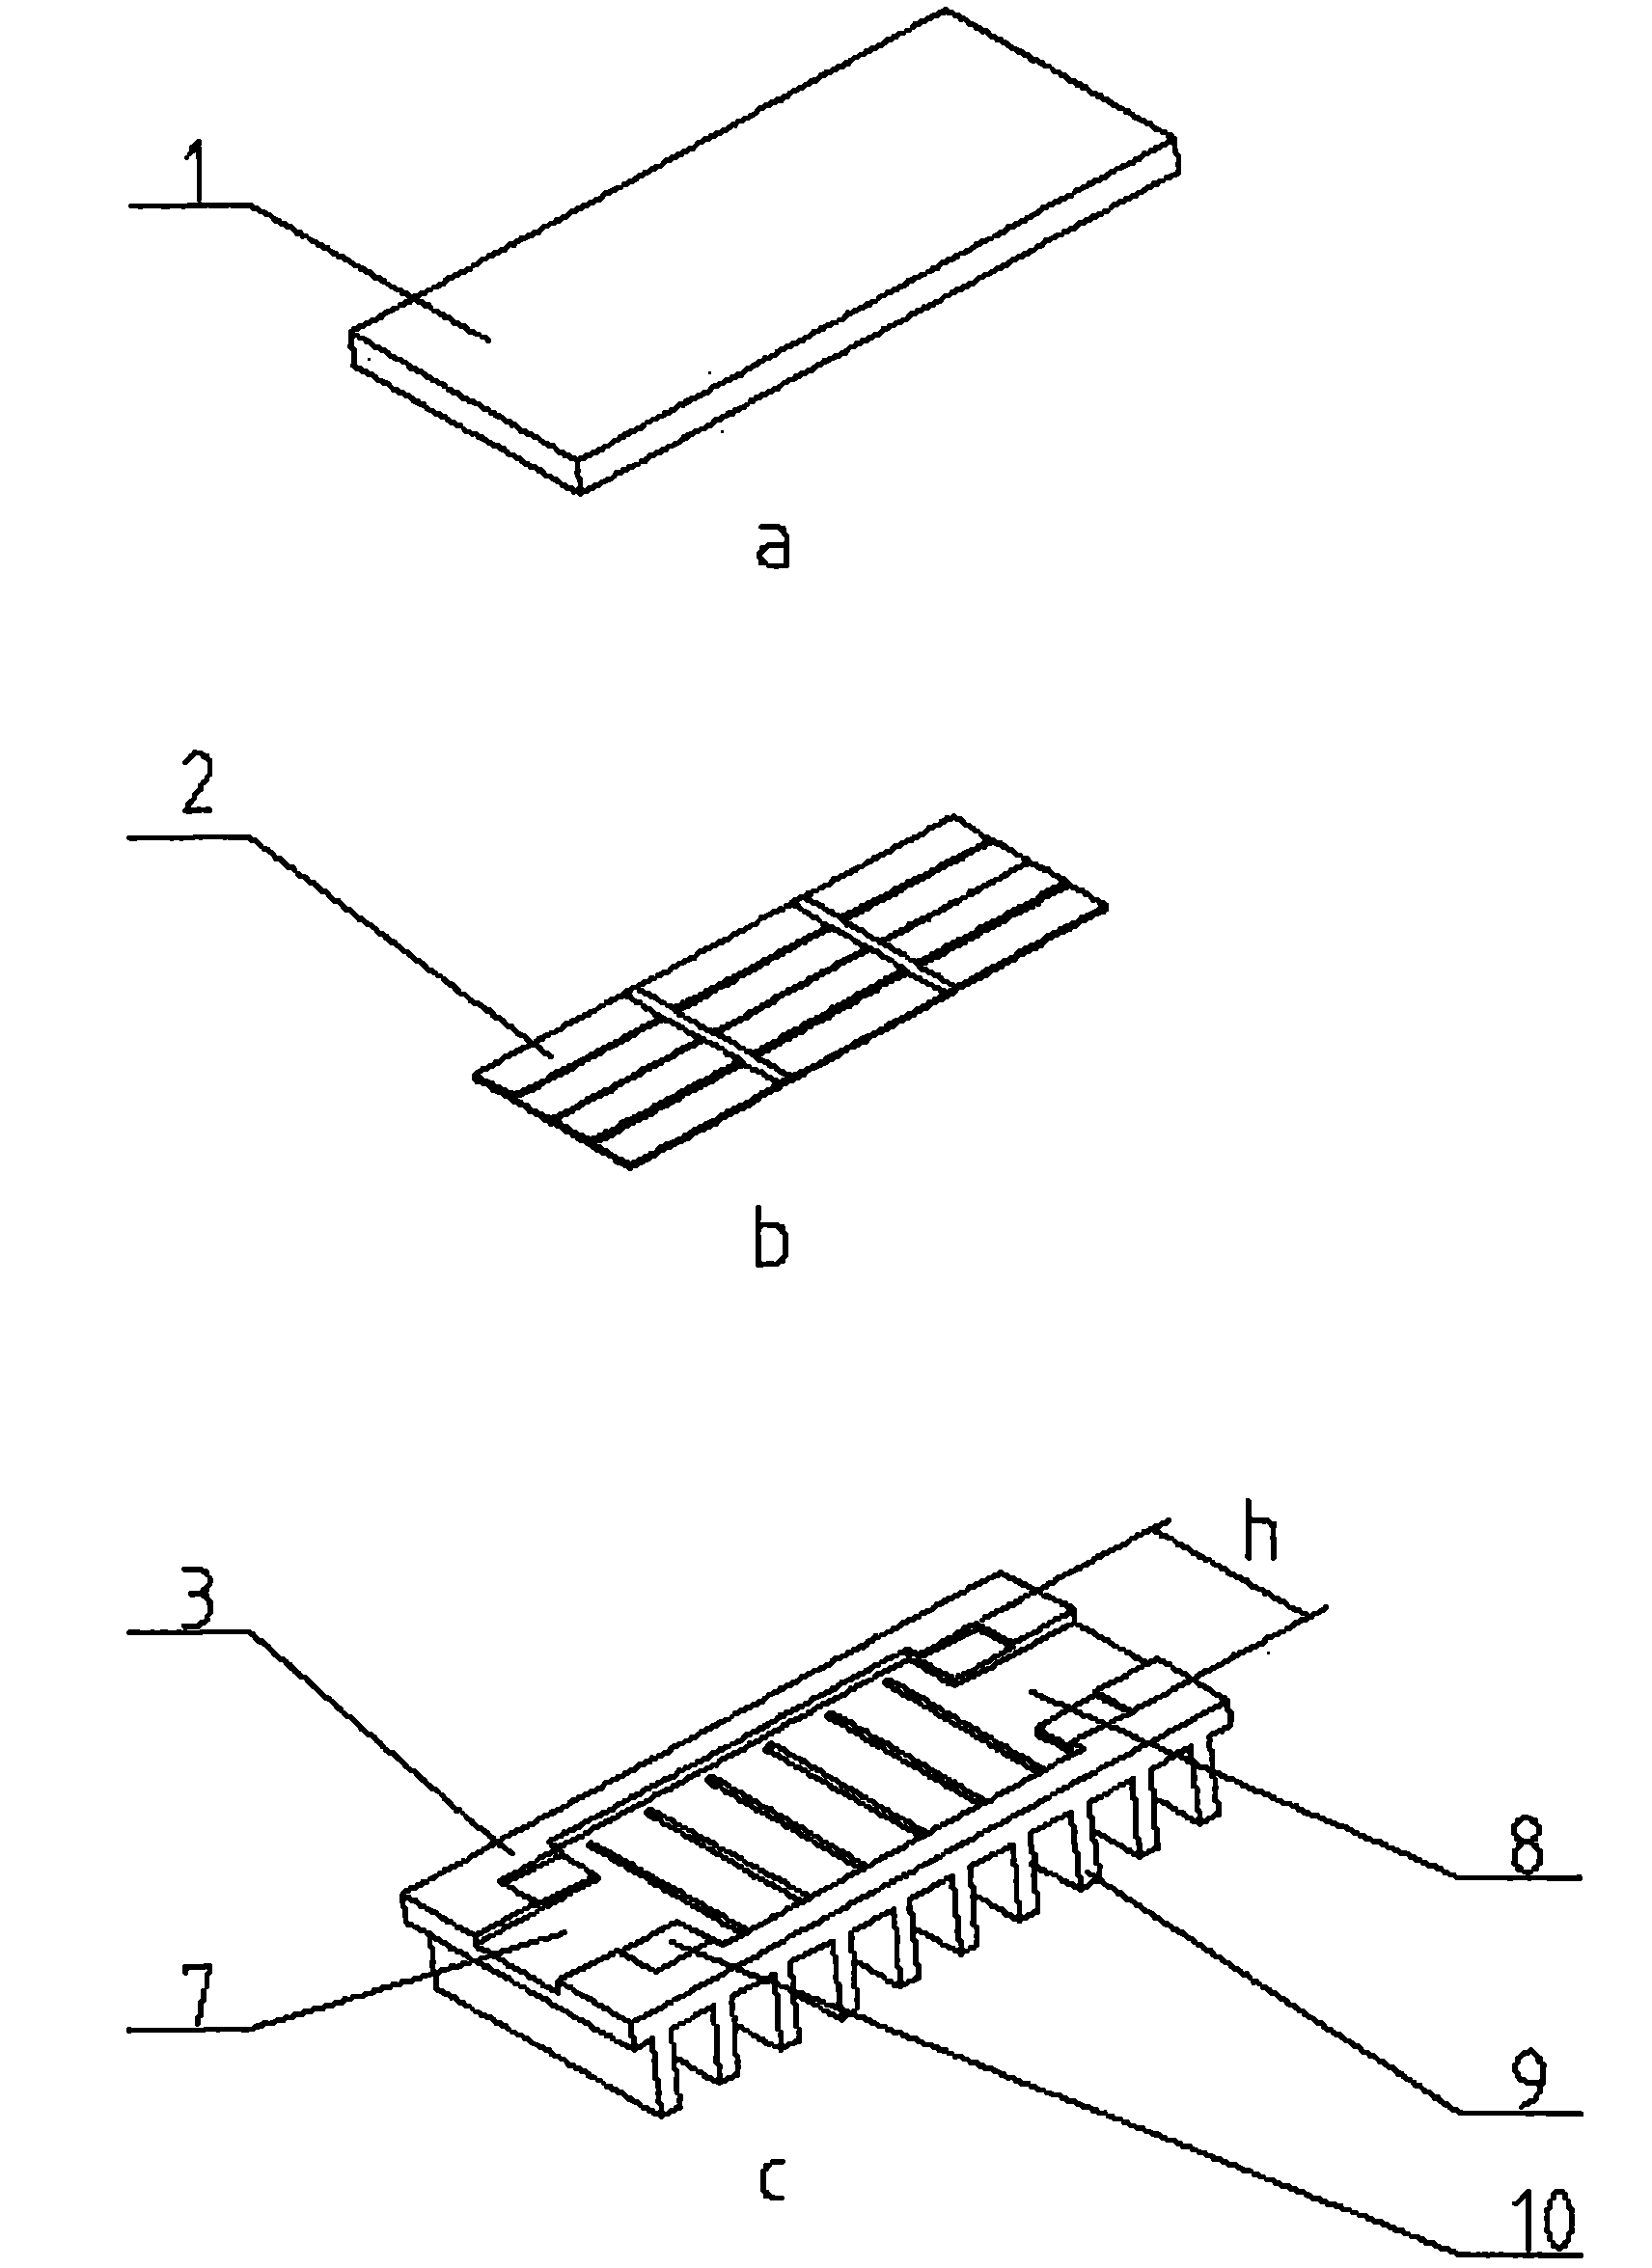 Solar photovoltaic cell with micro-fluidic structure